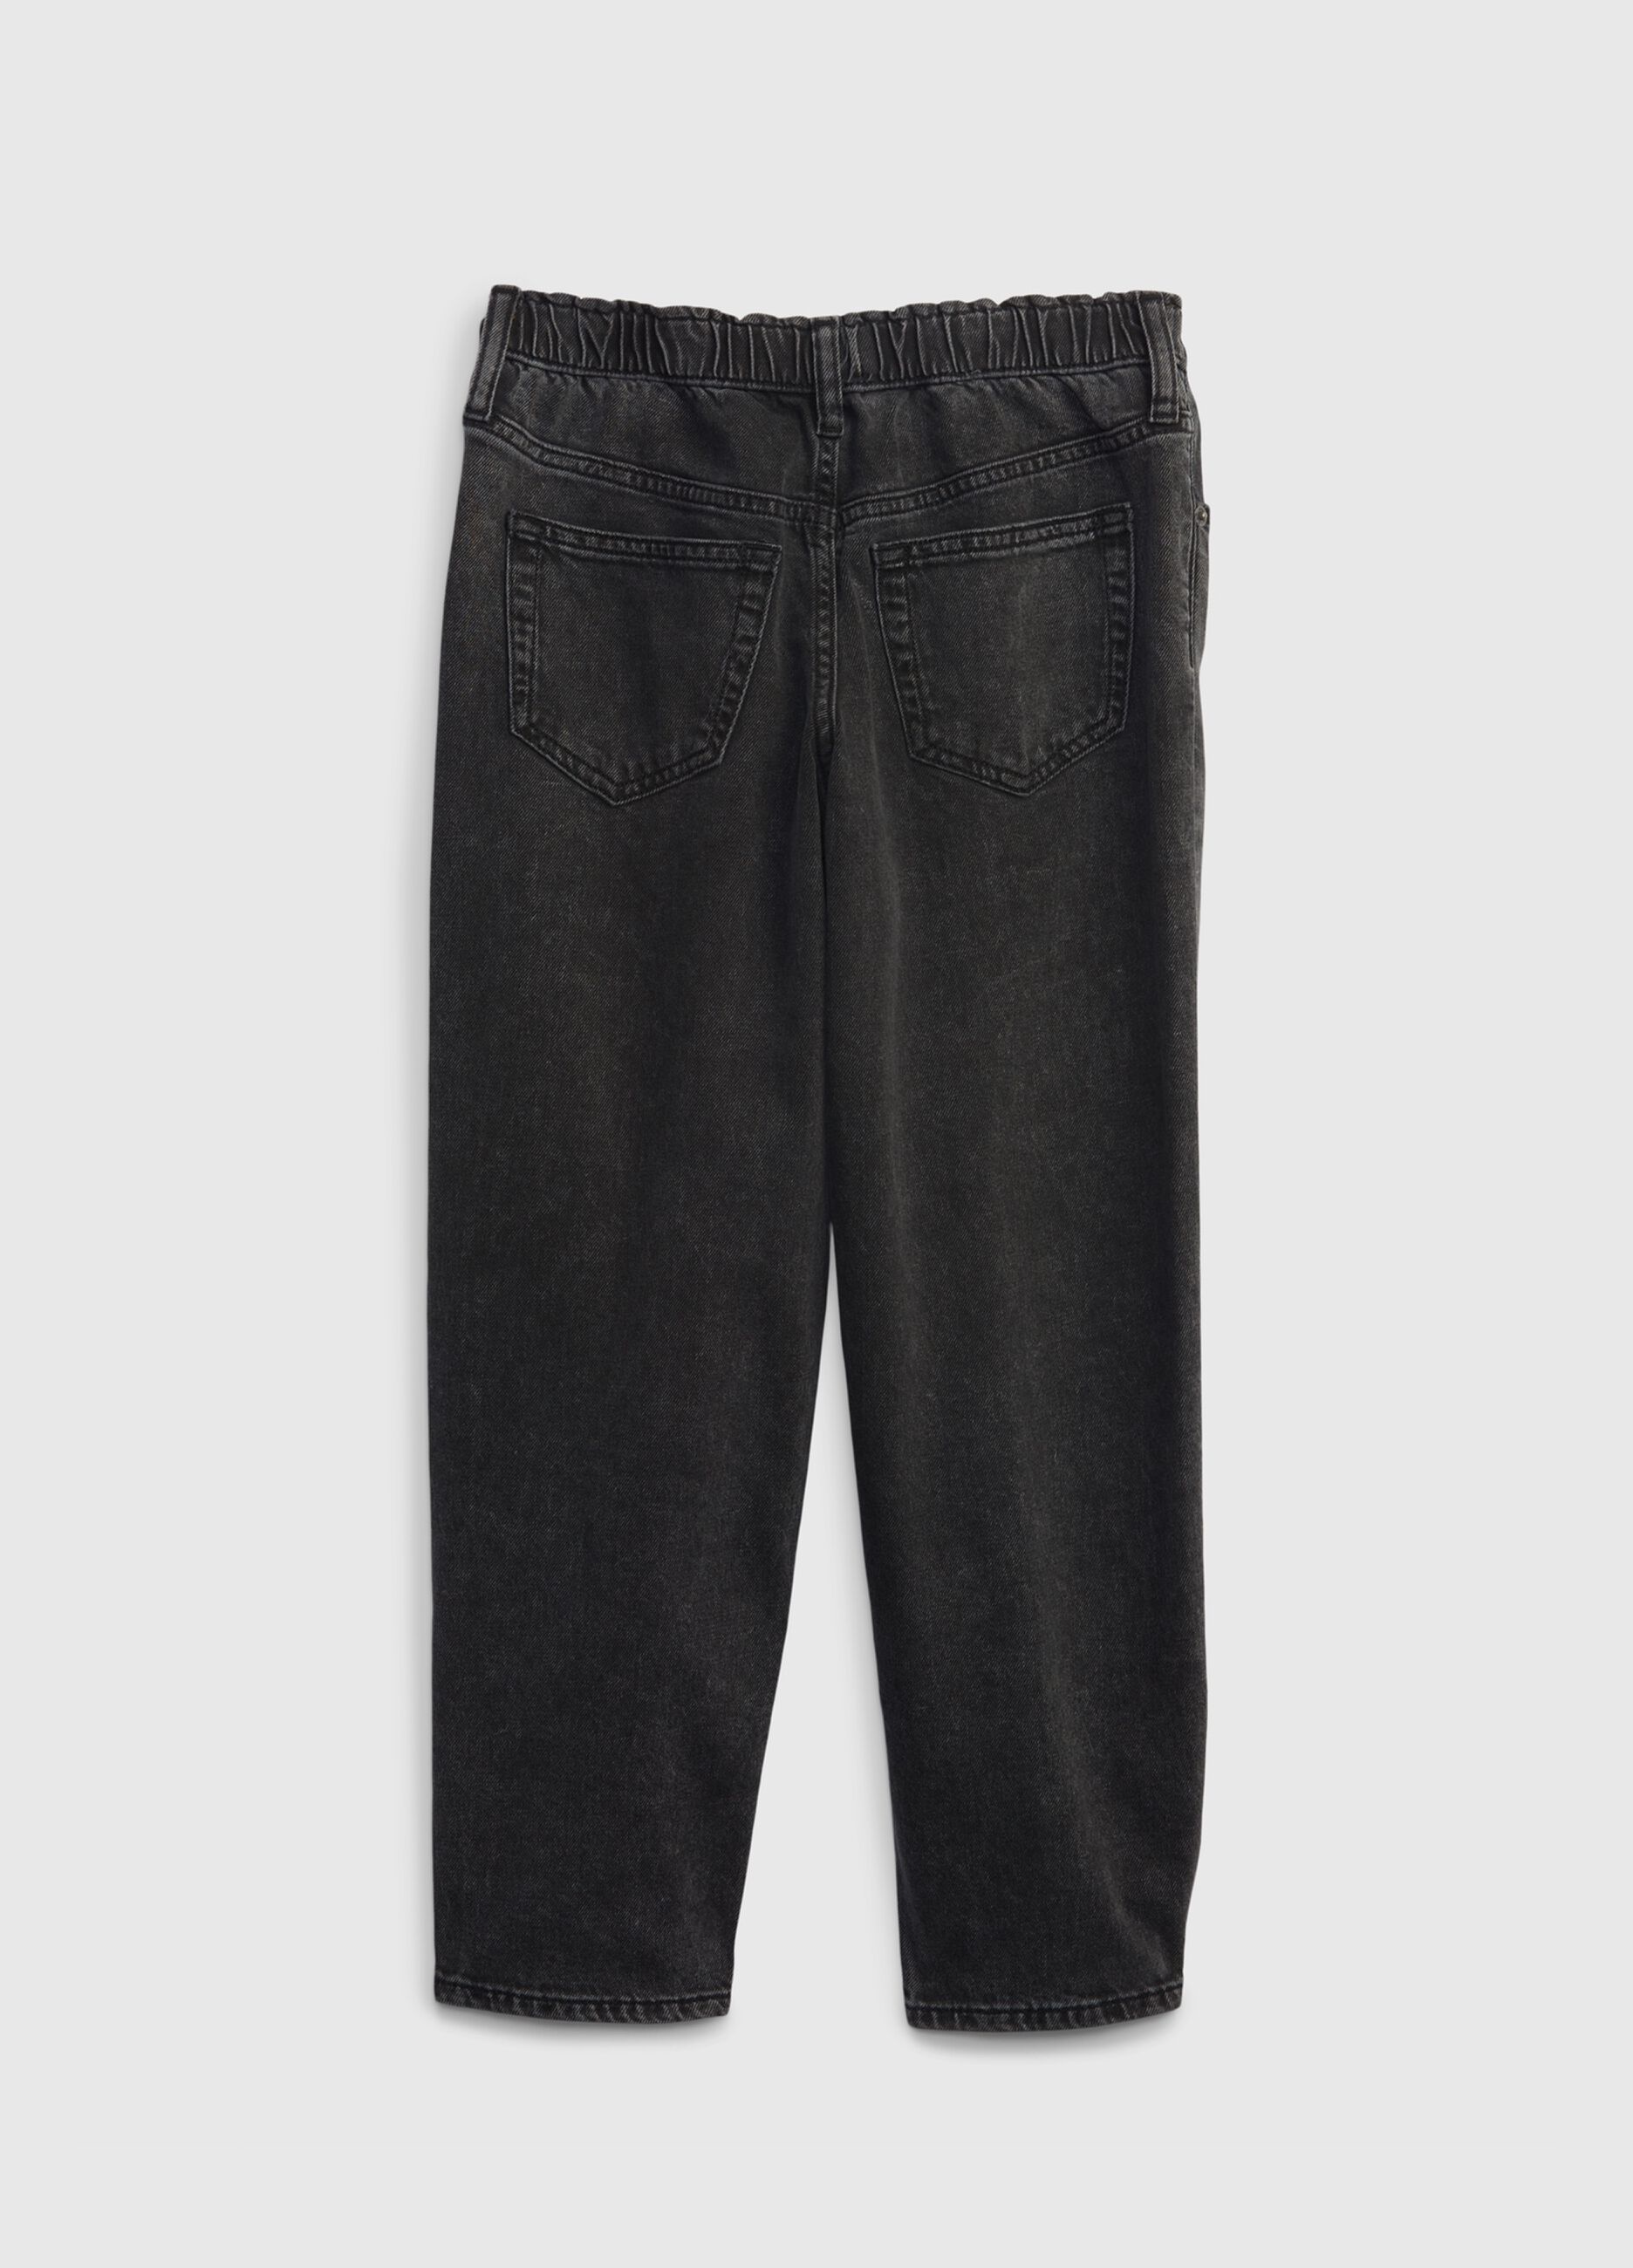 Barrel jeans with elastic waist band